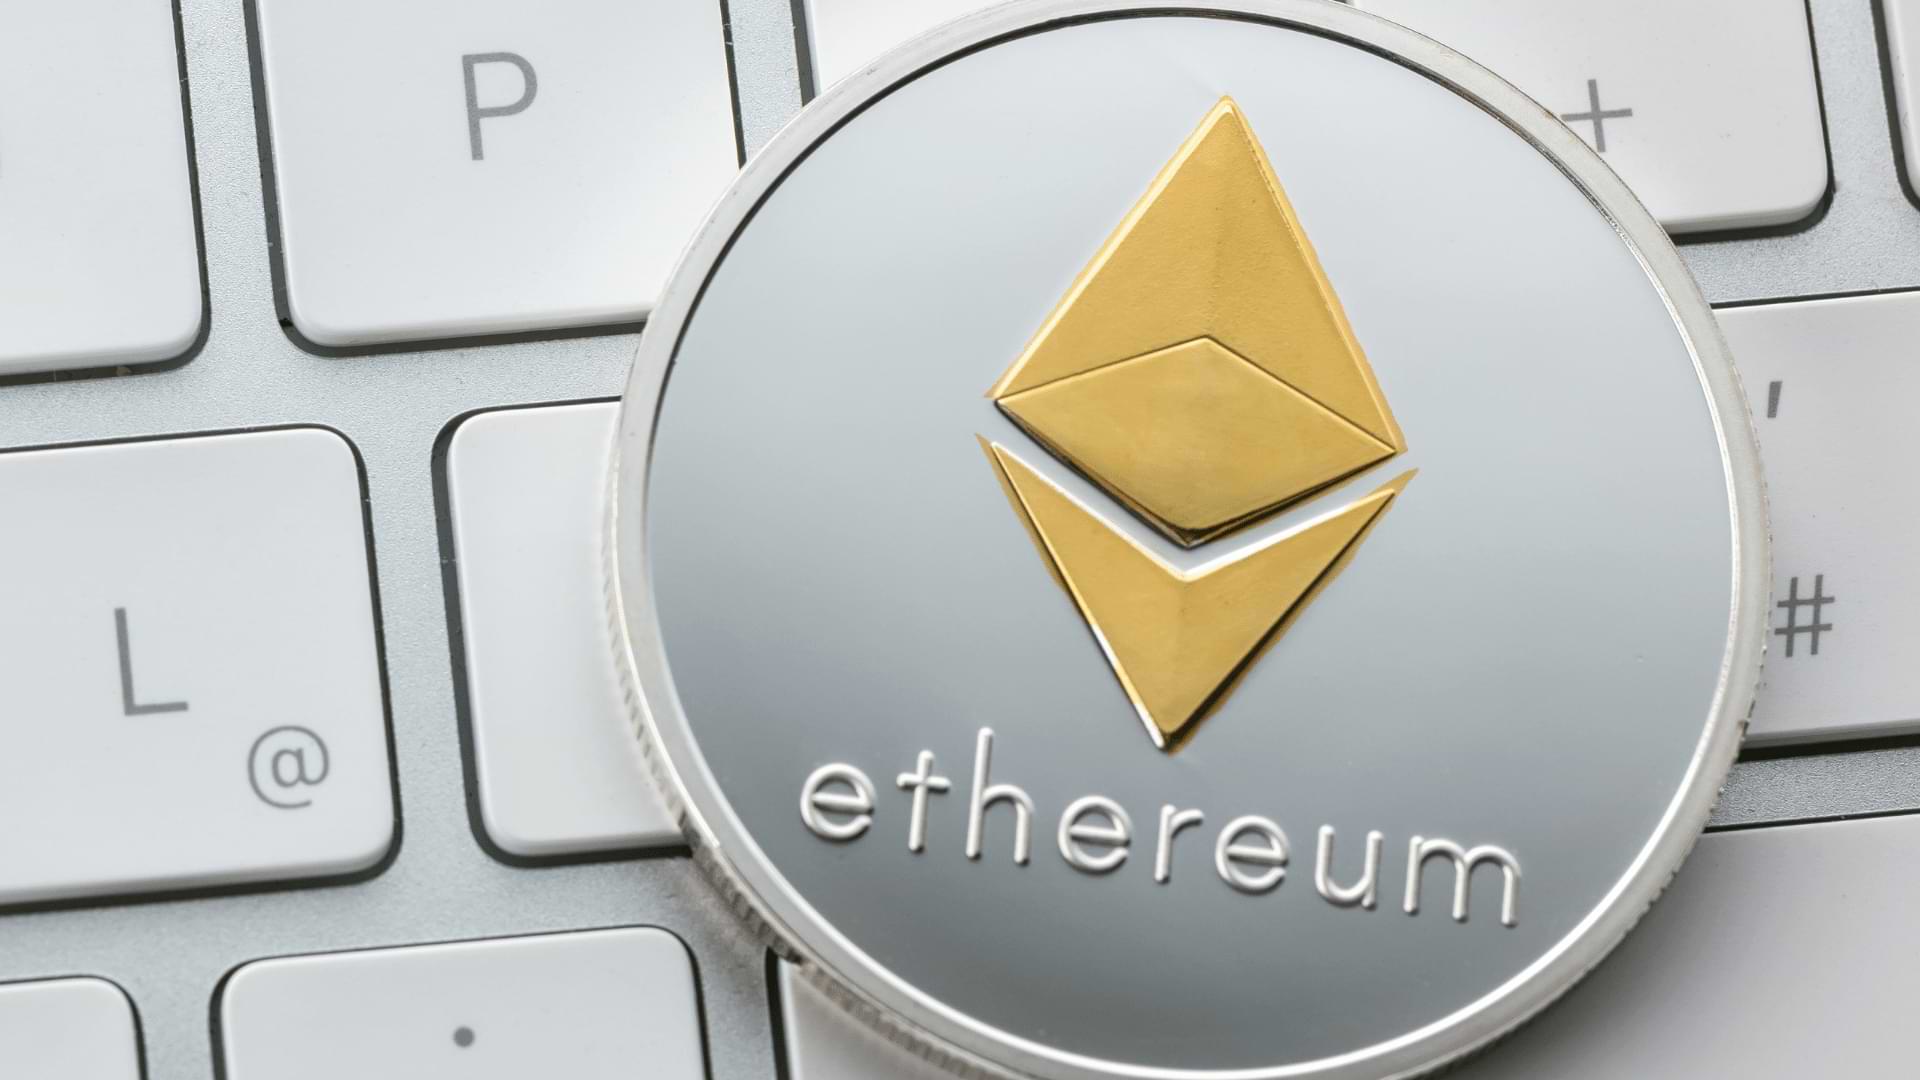 Ethereum Classic Price Prediction February 2021 / Is Ethereum a Good Investment in 2021 Based on the Price ... - Also, an update called ethereum 2.0 is scheduled for november 2020 as currently the network is stretched to its limit with the rise of defi.